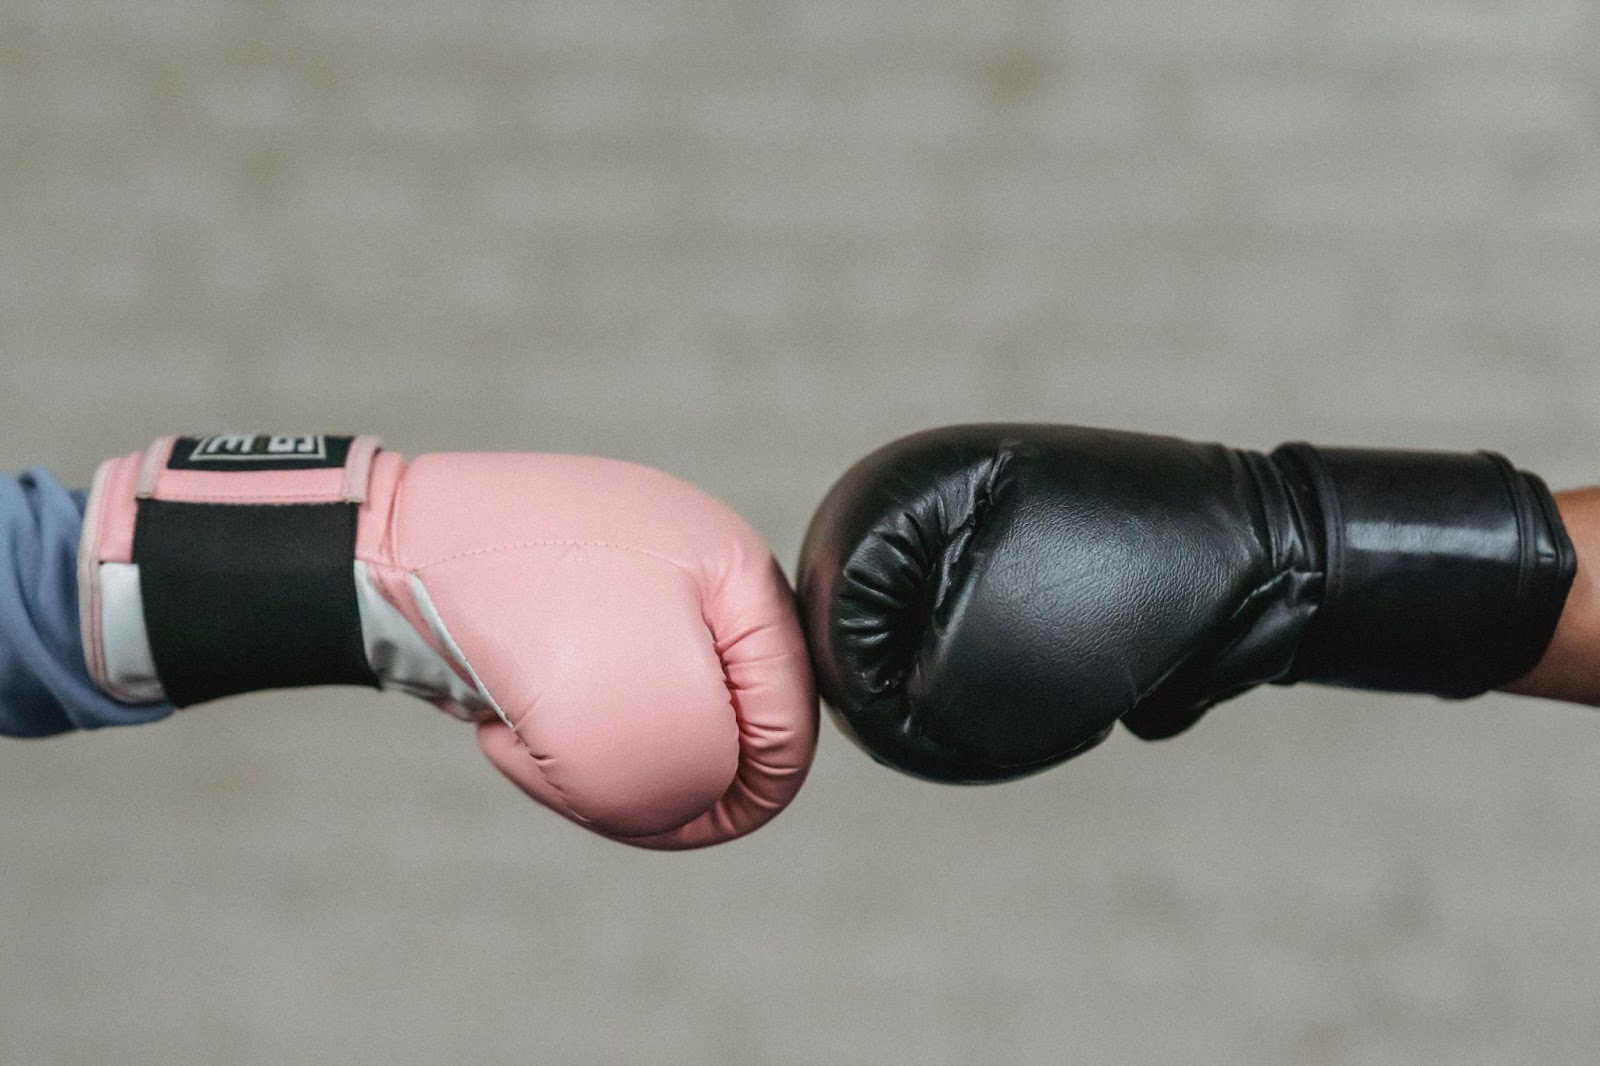 Competitive advantage captured in an image of two boxing gloves squaring off.